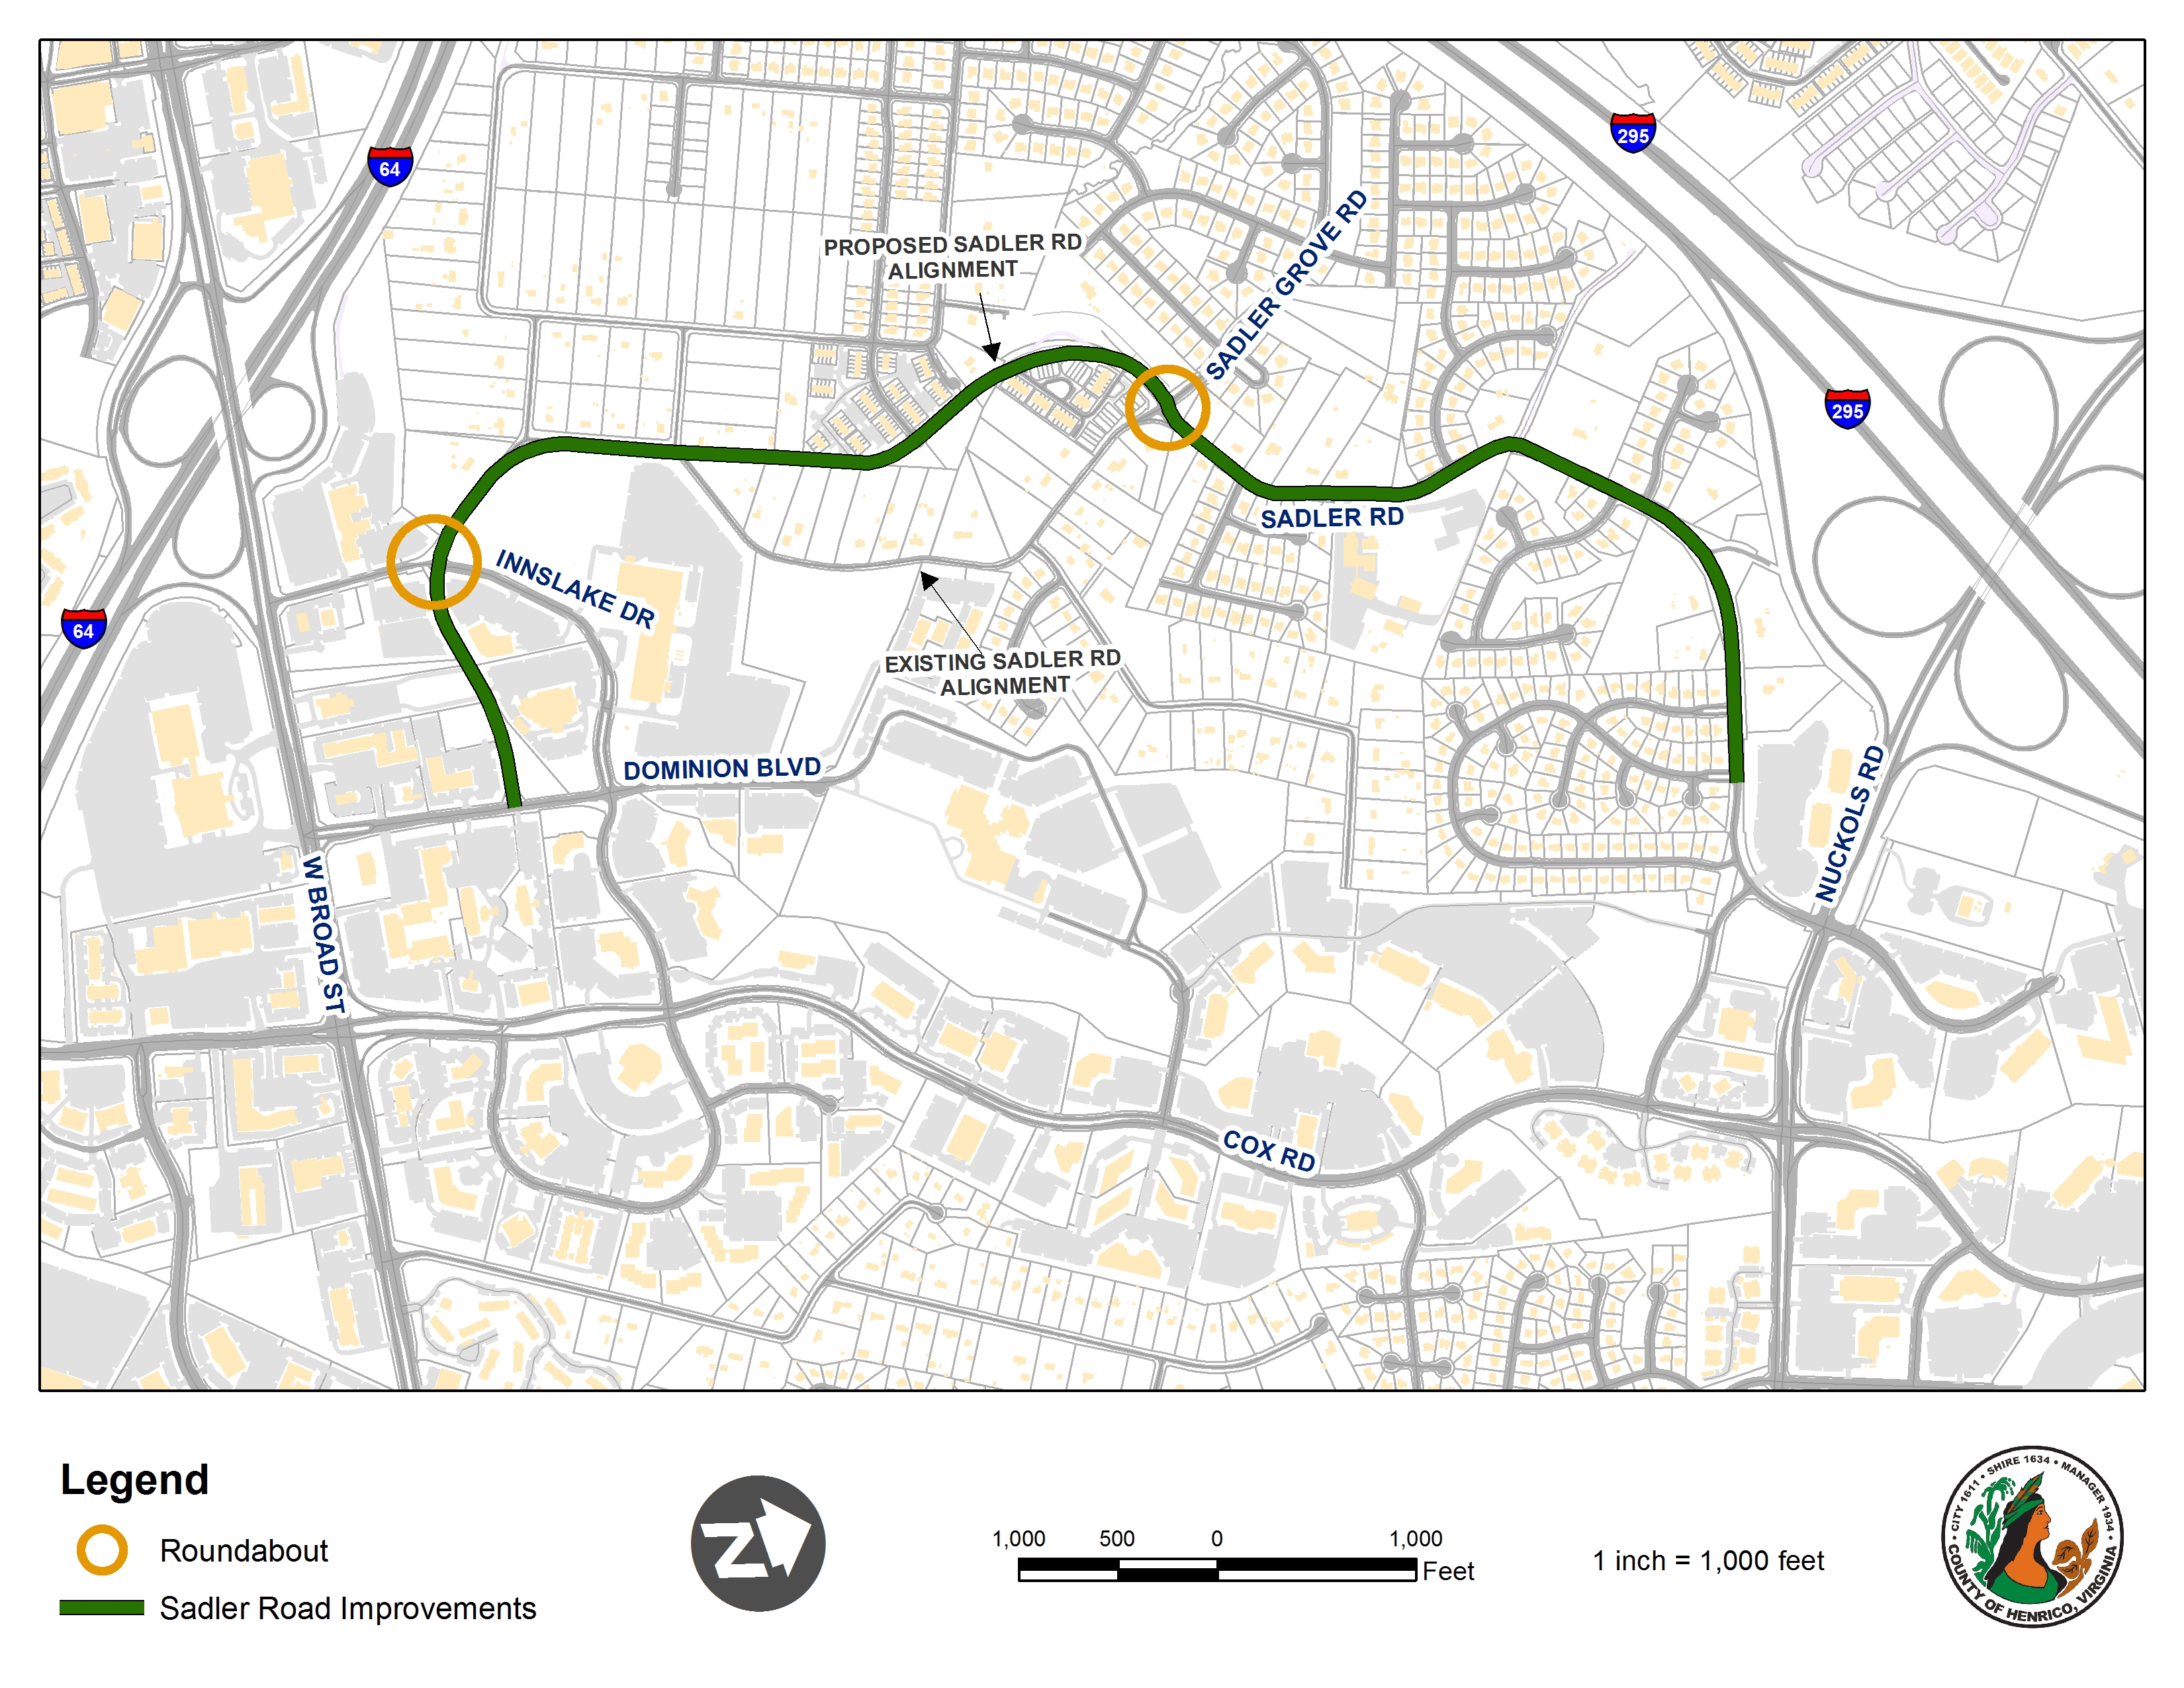 A map of the Sadler Road improvement details and overall boundaries for reference purposes